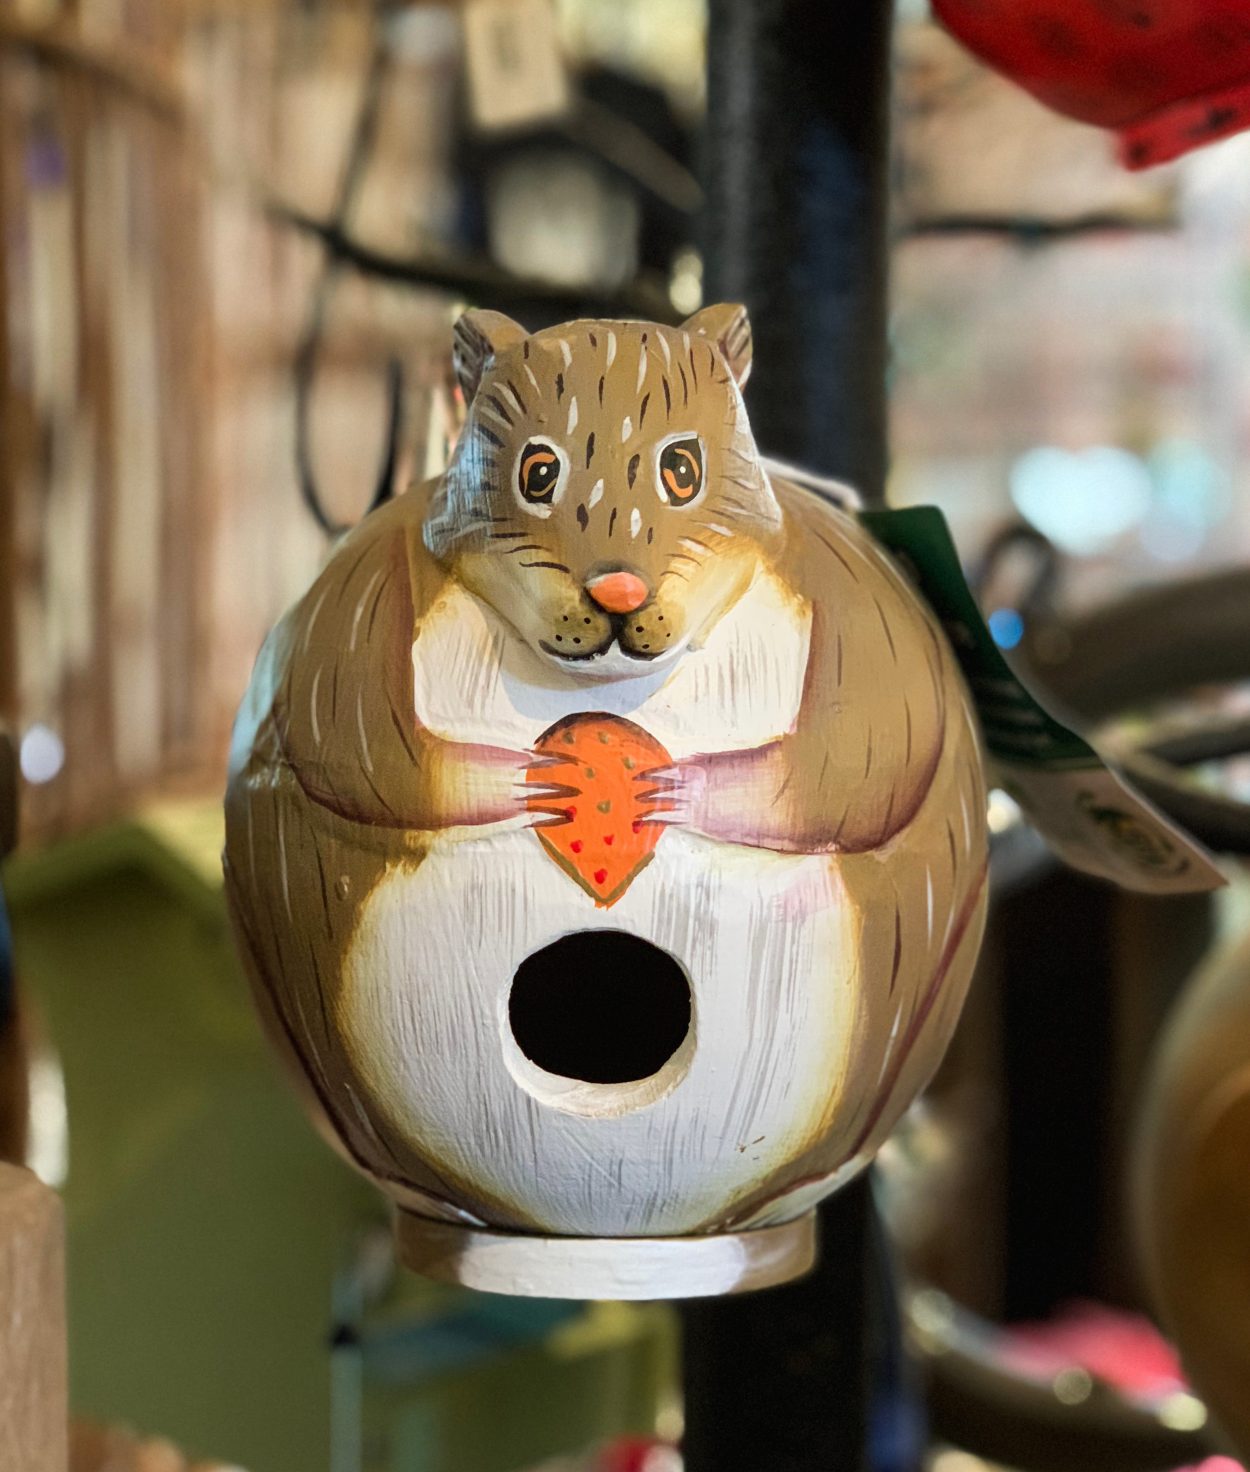 Painted squirrel bird house, with entrance hole in belly.